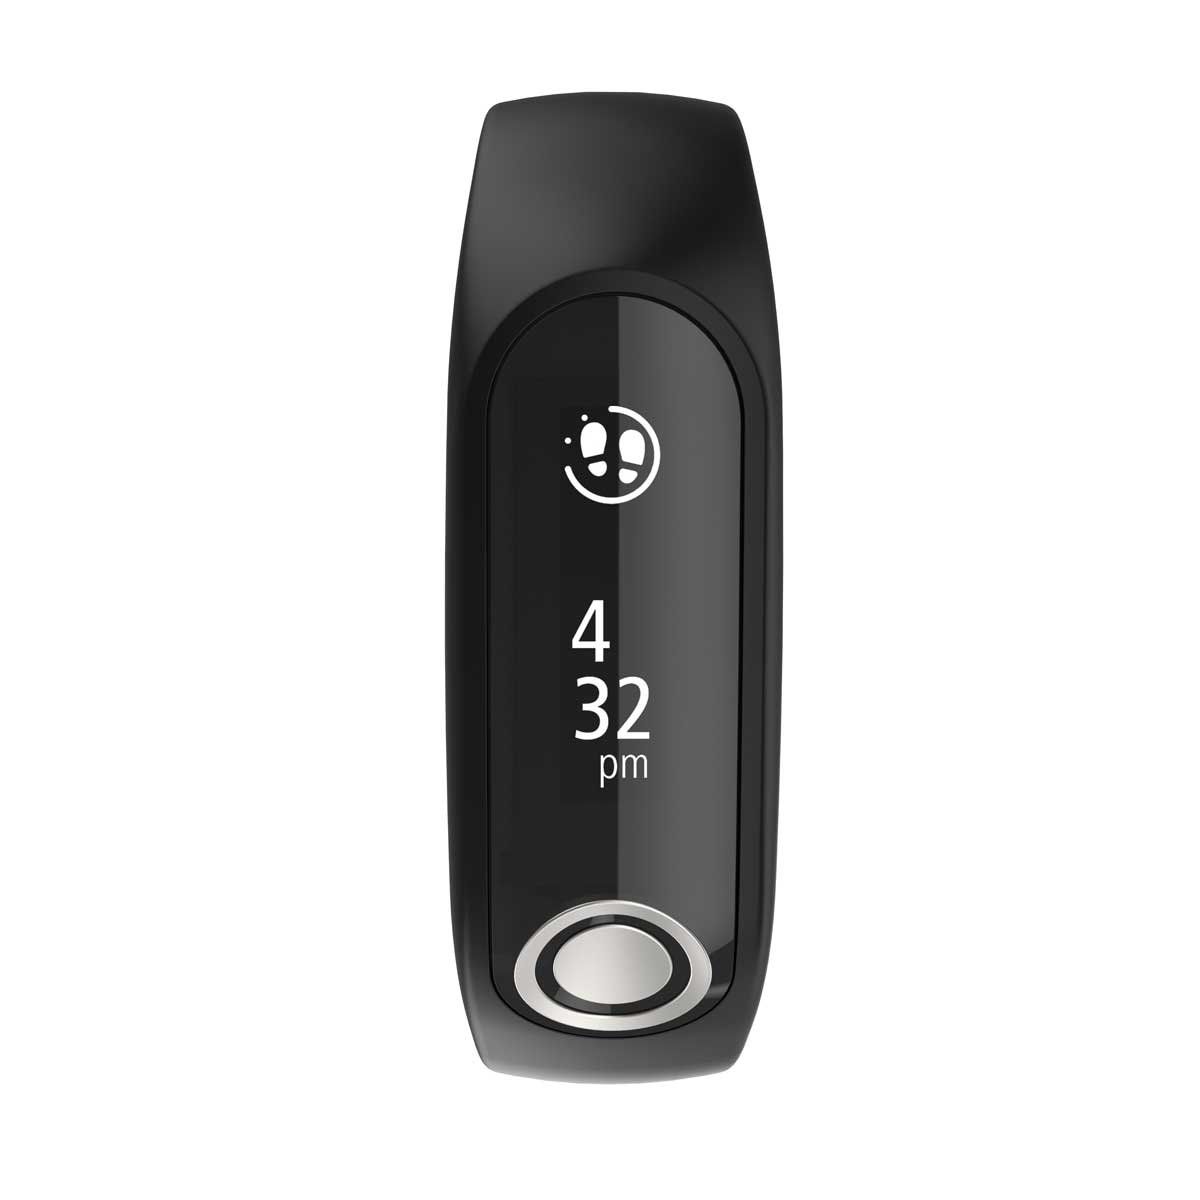 Tomtom Touch Fitness Tracker Cardio Body Composition - Chico